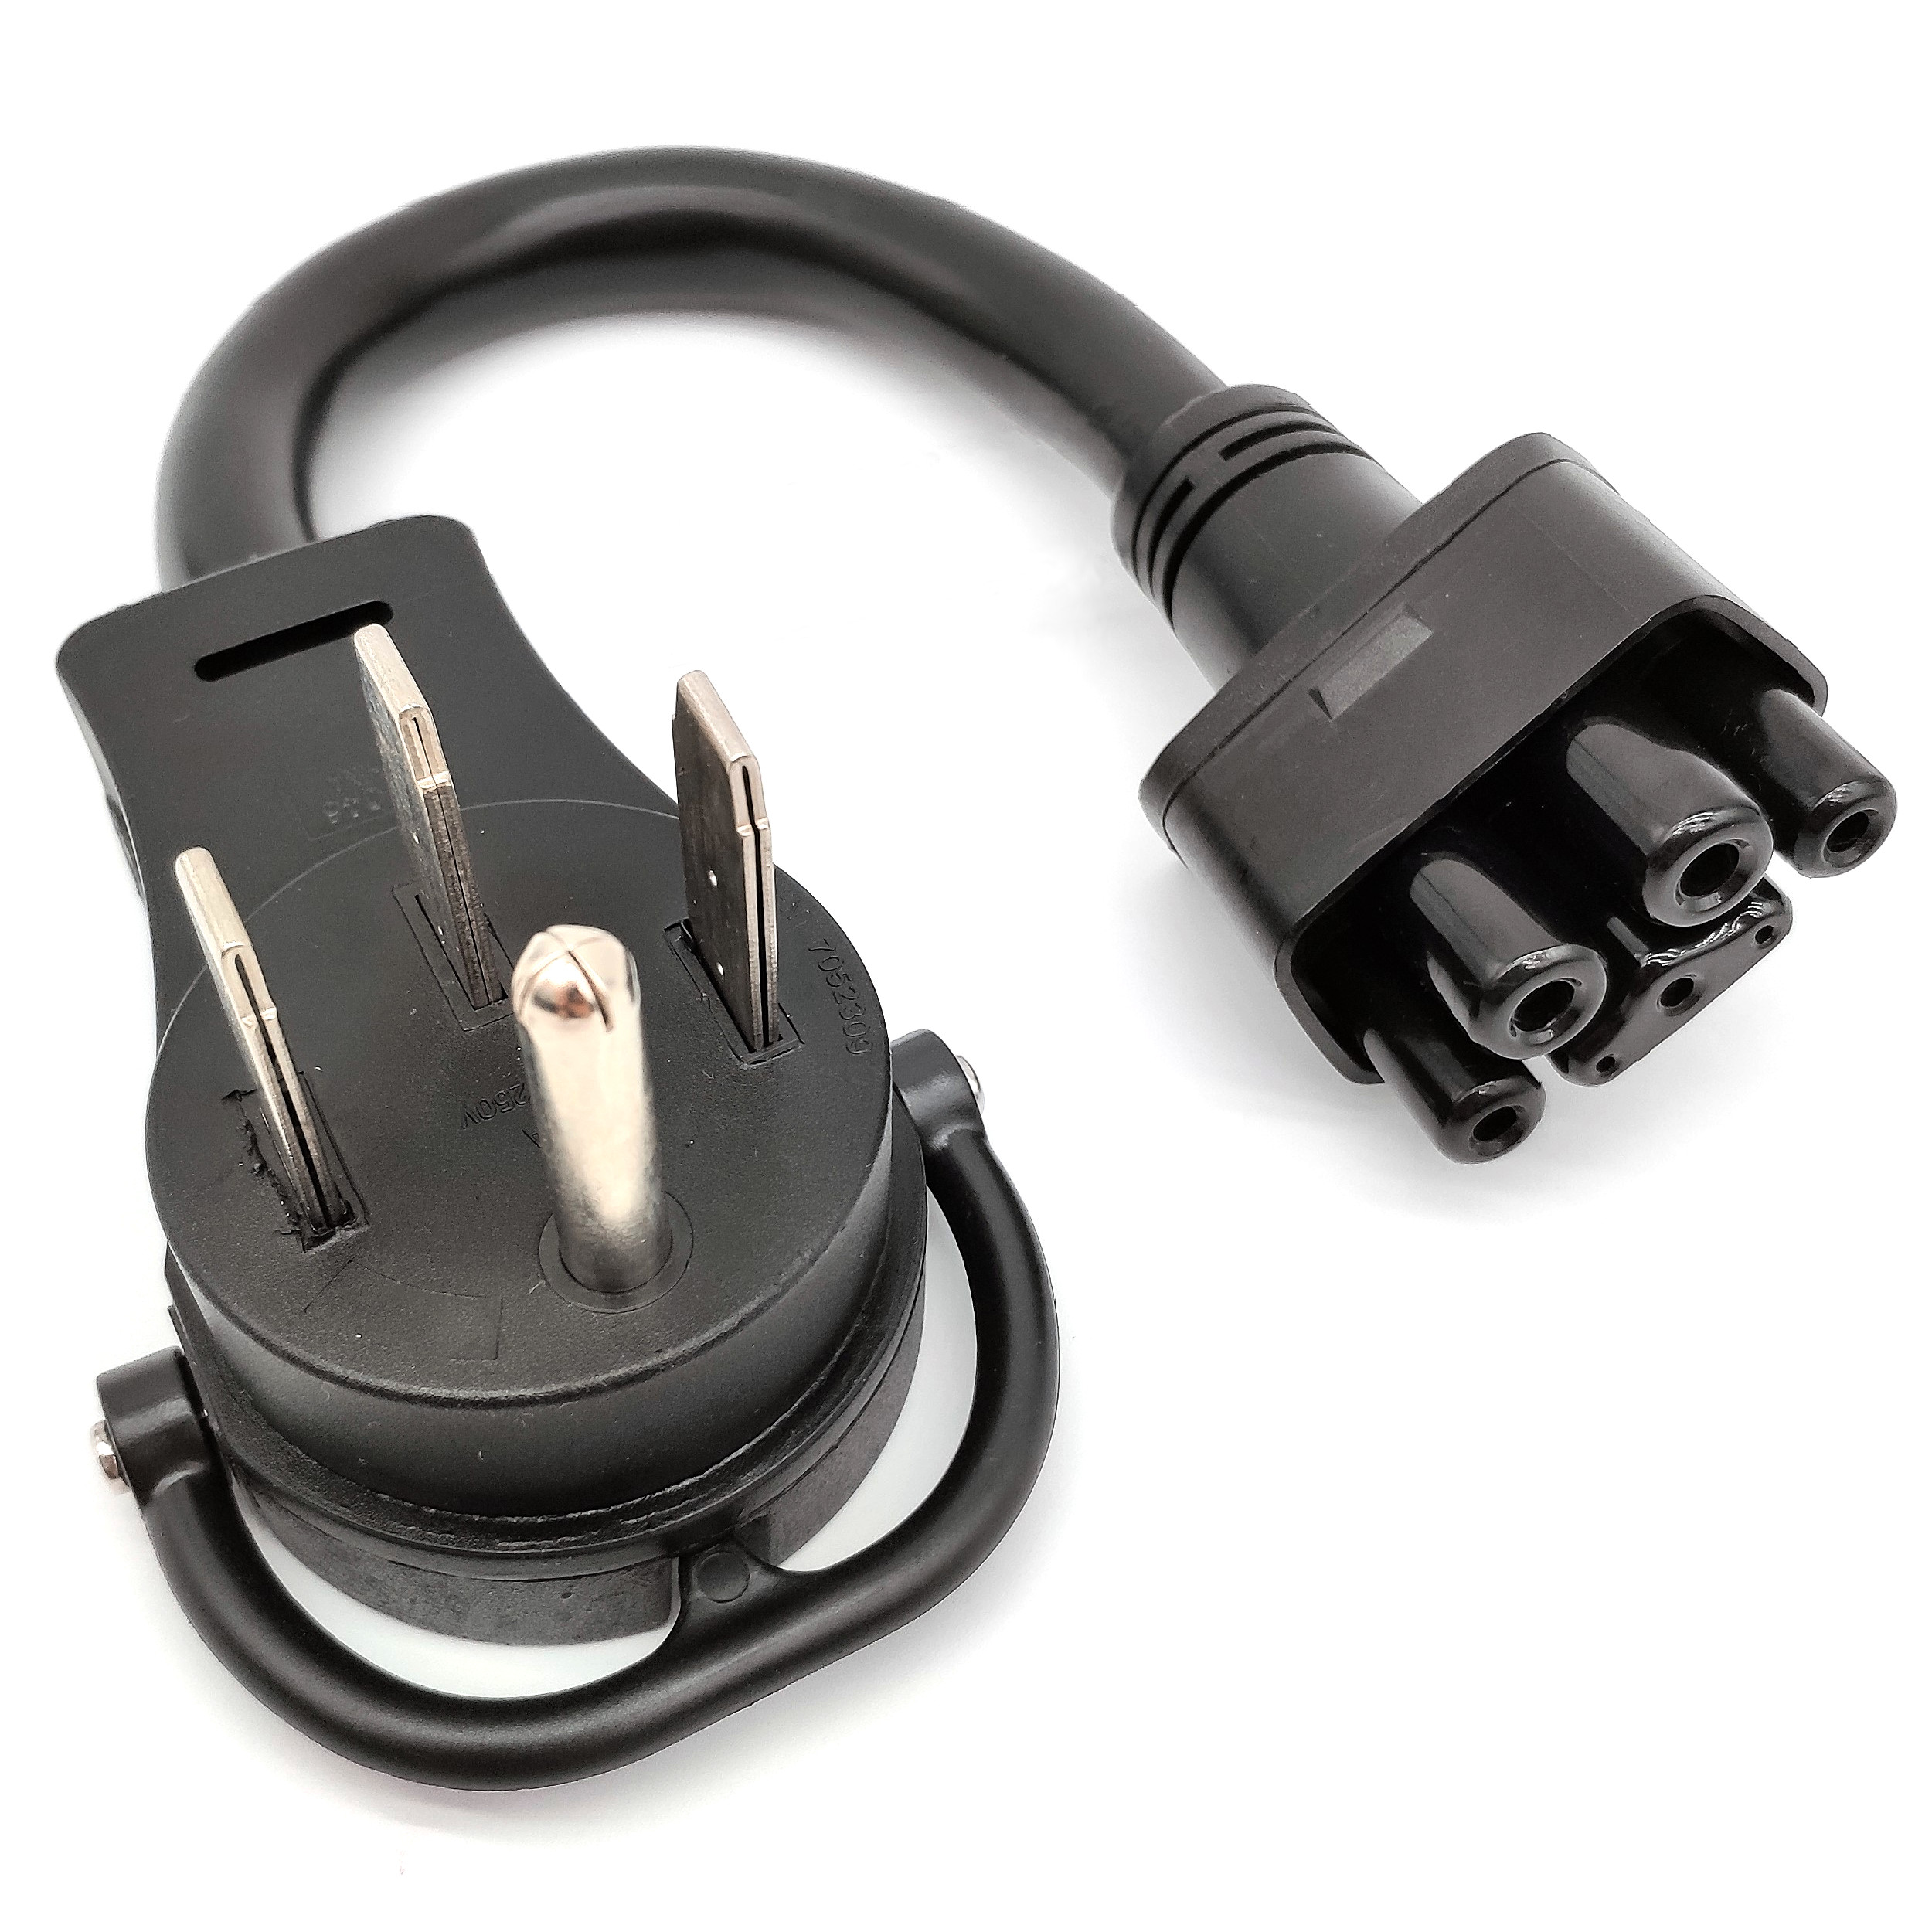 Designed for ev Charging Heavy Duty and Durable NEMA 6-30 to NEMA14-50R Adapter 12 Allows Your 6-30 plugged 16 amp Charger to use a 14-50 Outlet NEMA6-30 to NEMA14-50R 